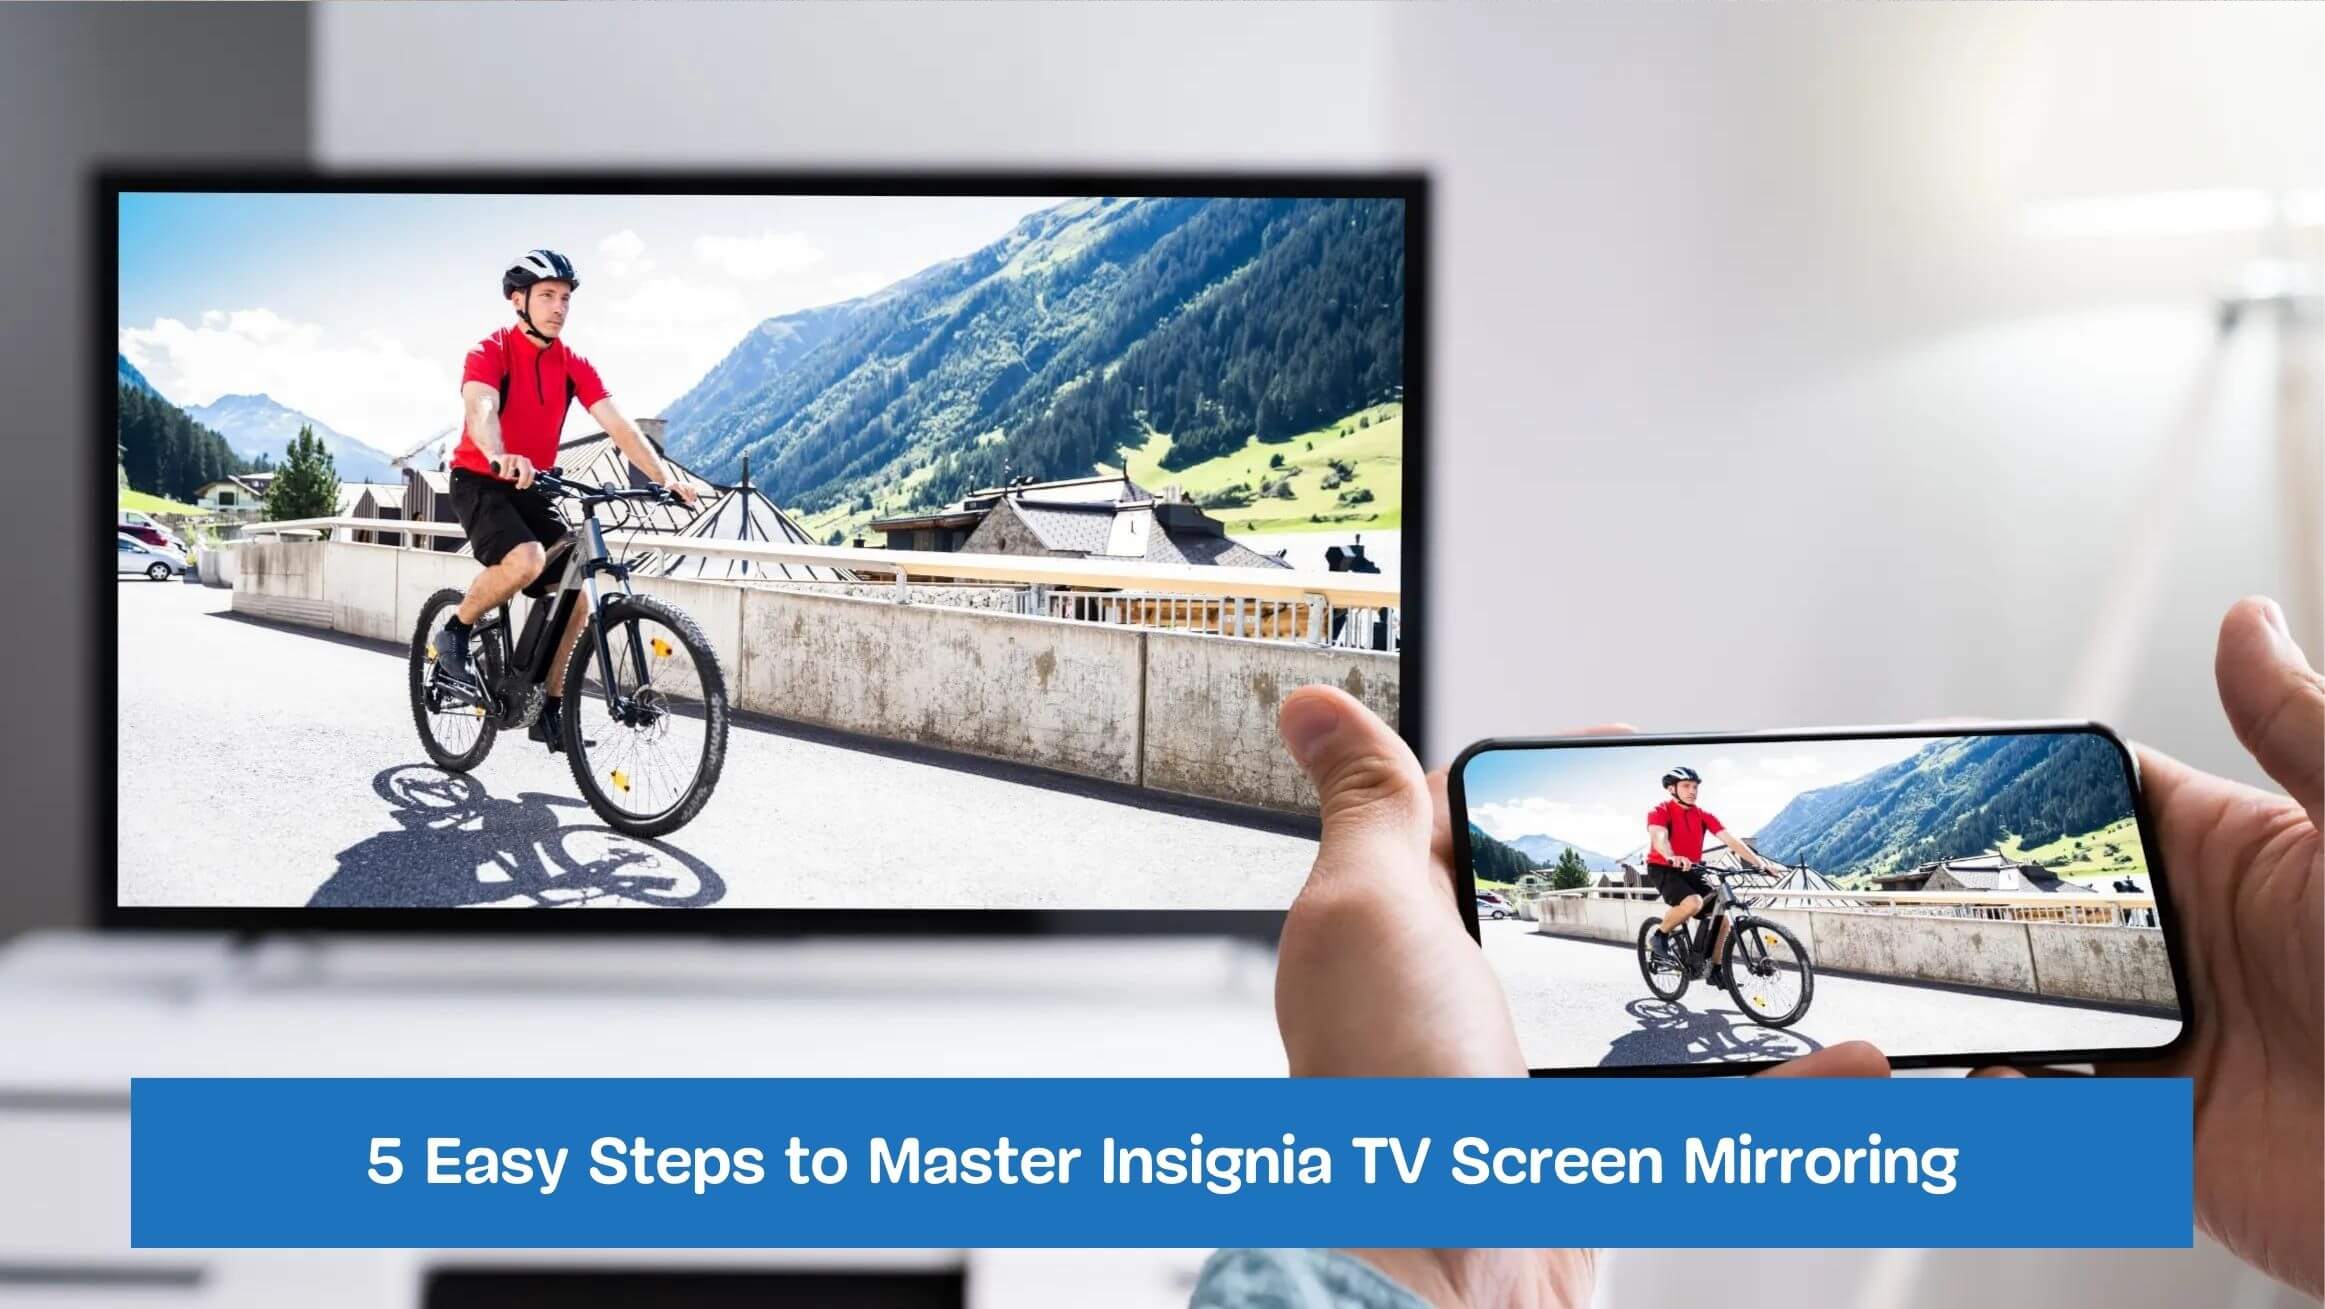 5 Easy Steps to Master Insignia TV Screen Mirroring